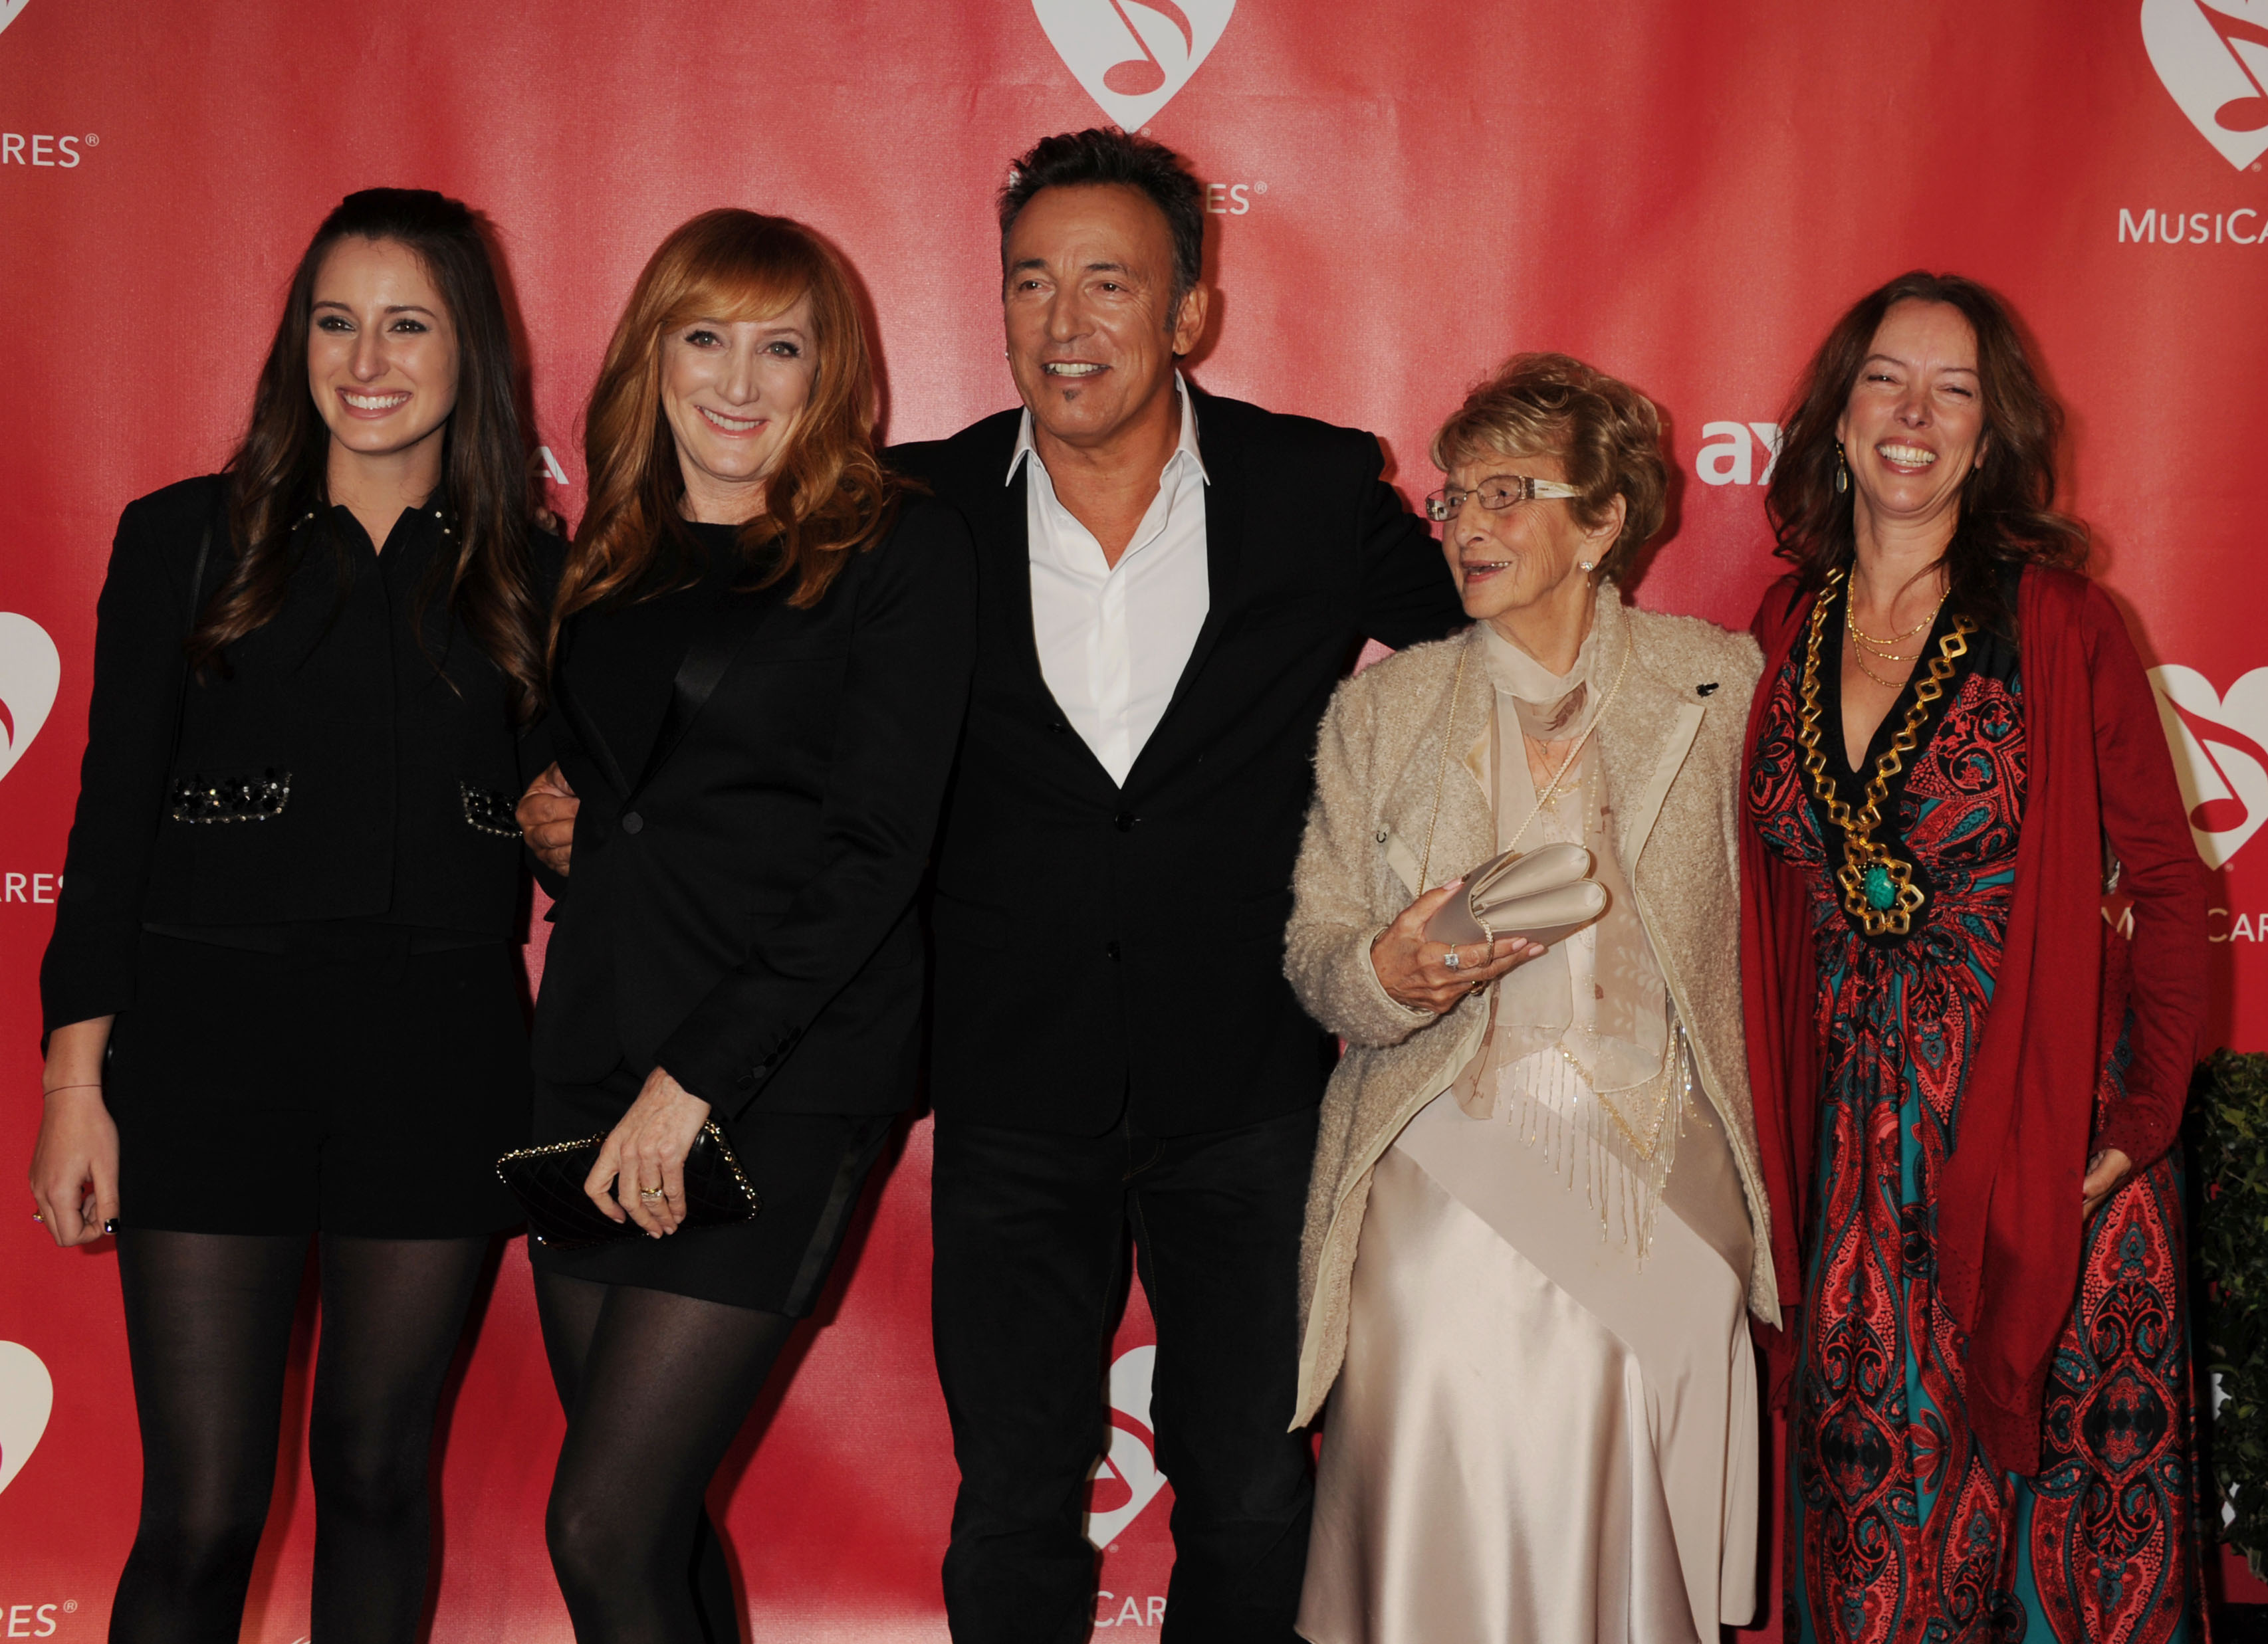 (L-R) Jessica Rae Springsteen, Patti Scialfa, Bruce Springsteen, Adele Springsteen, and Pamela Springsteen arrive at the 2013 MusiCares Person Of The Year at Los Angeles Convention Center, on February 8, 2013, in Los Angeles, California. | Source: Getty Images